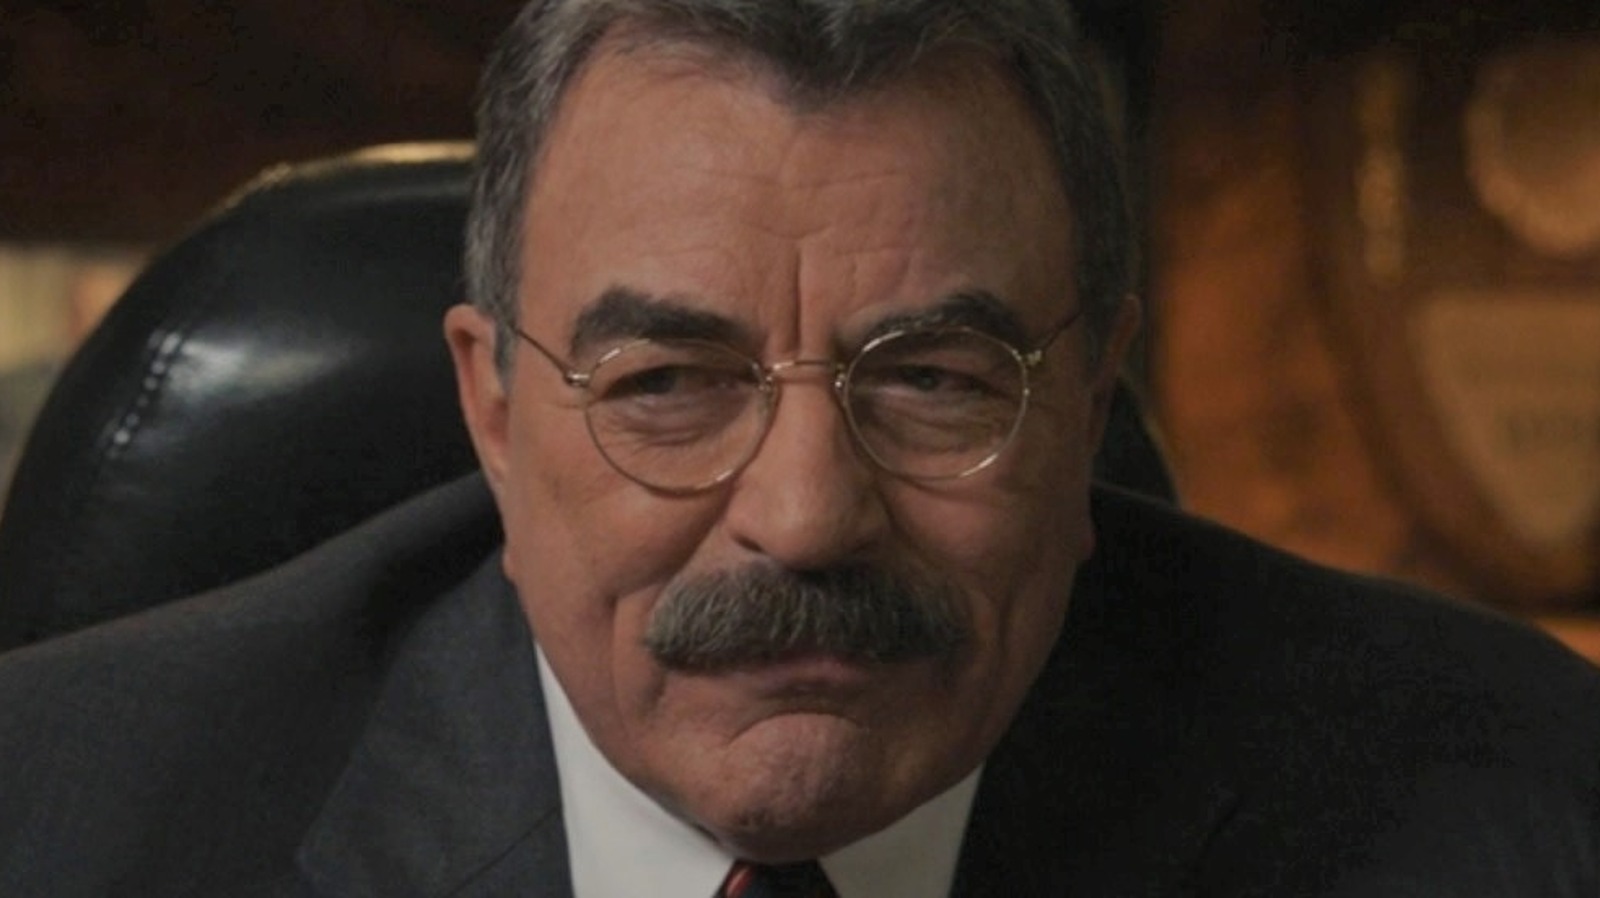 The Worst Blue Bloods Character According To Reddit